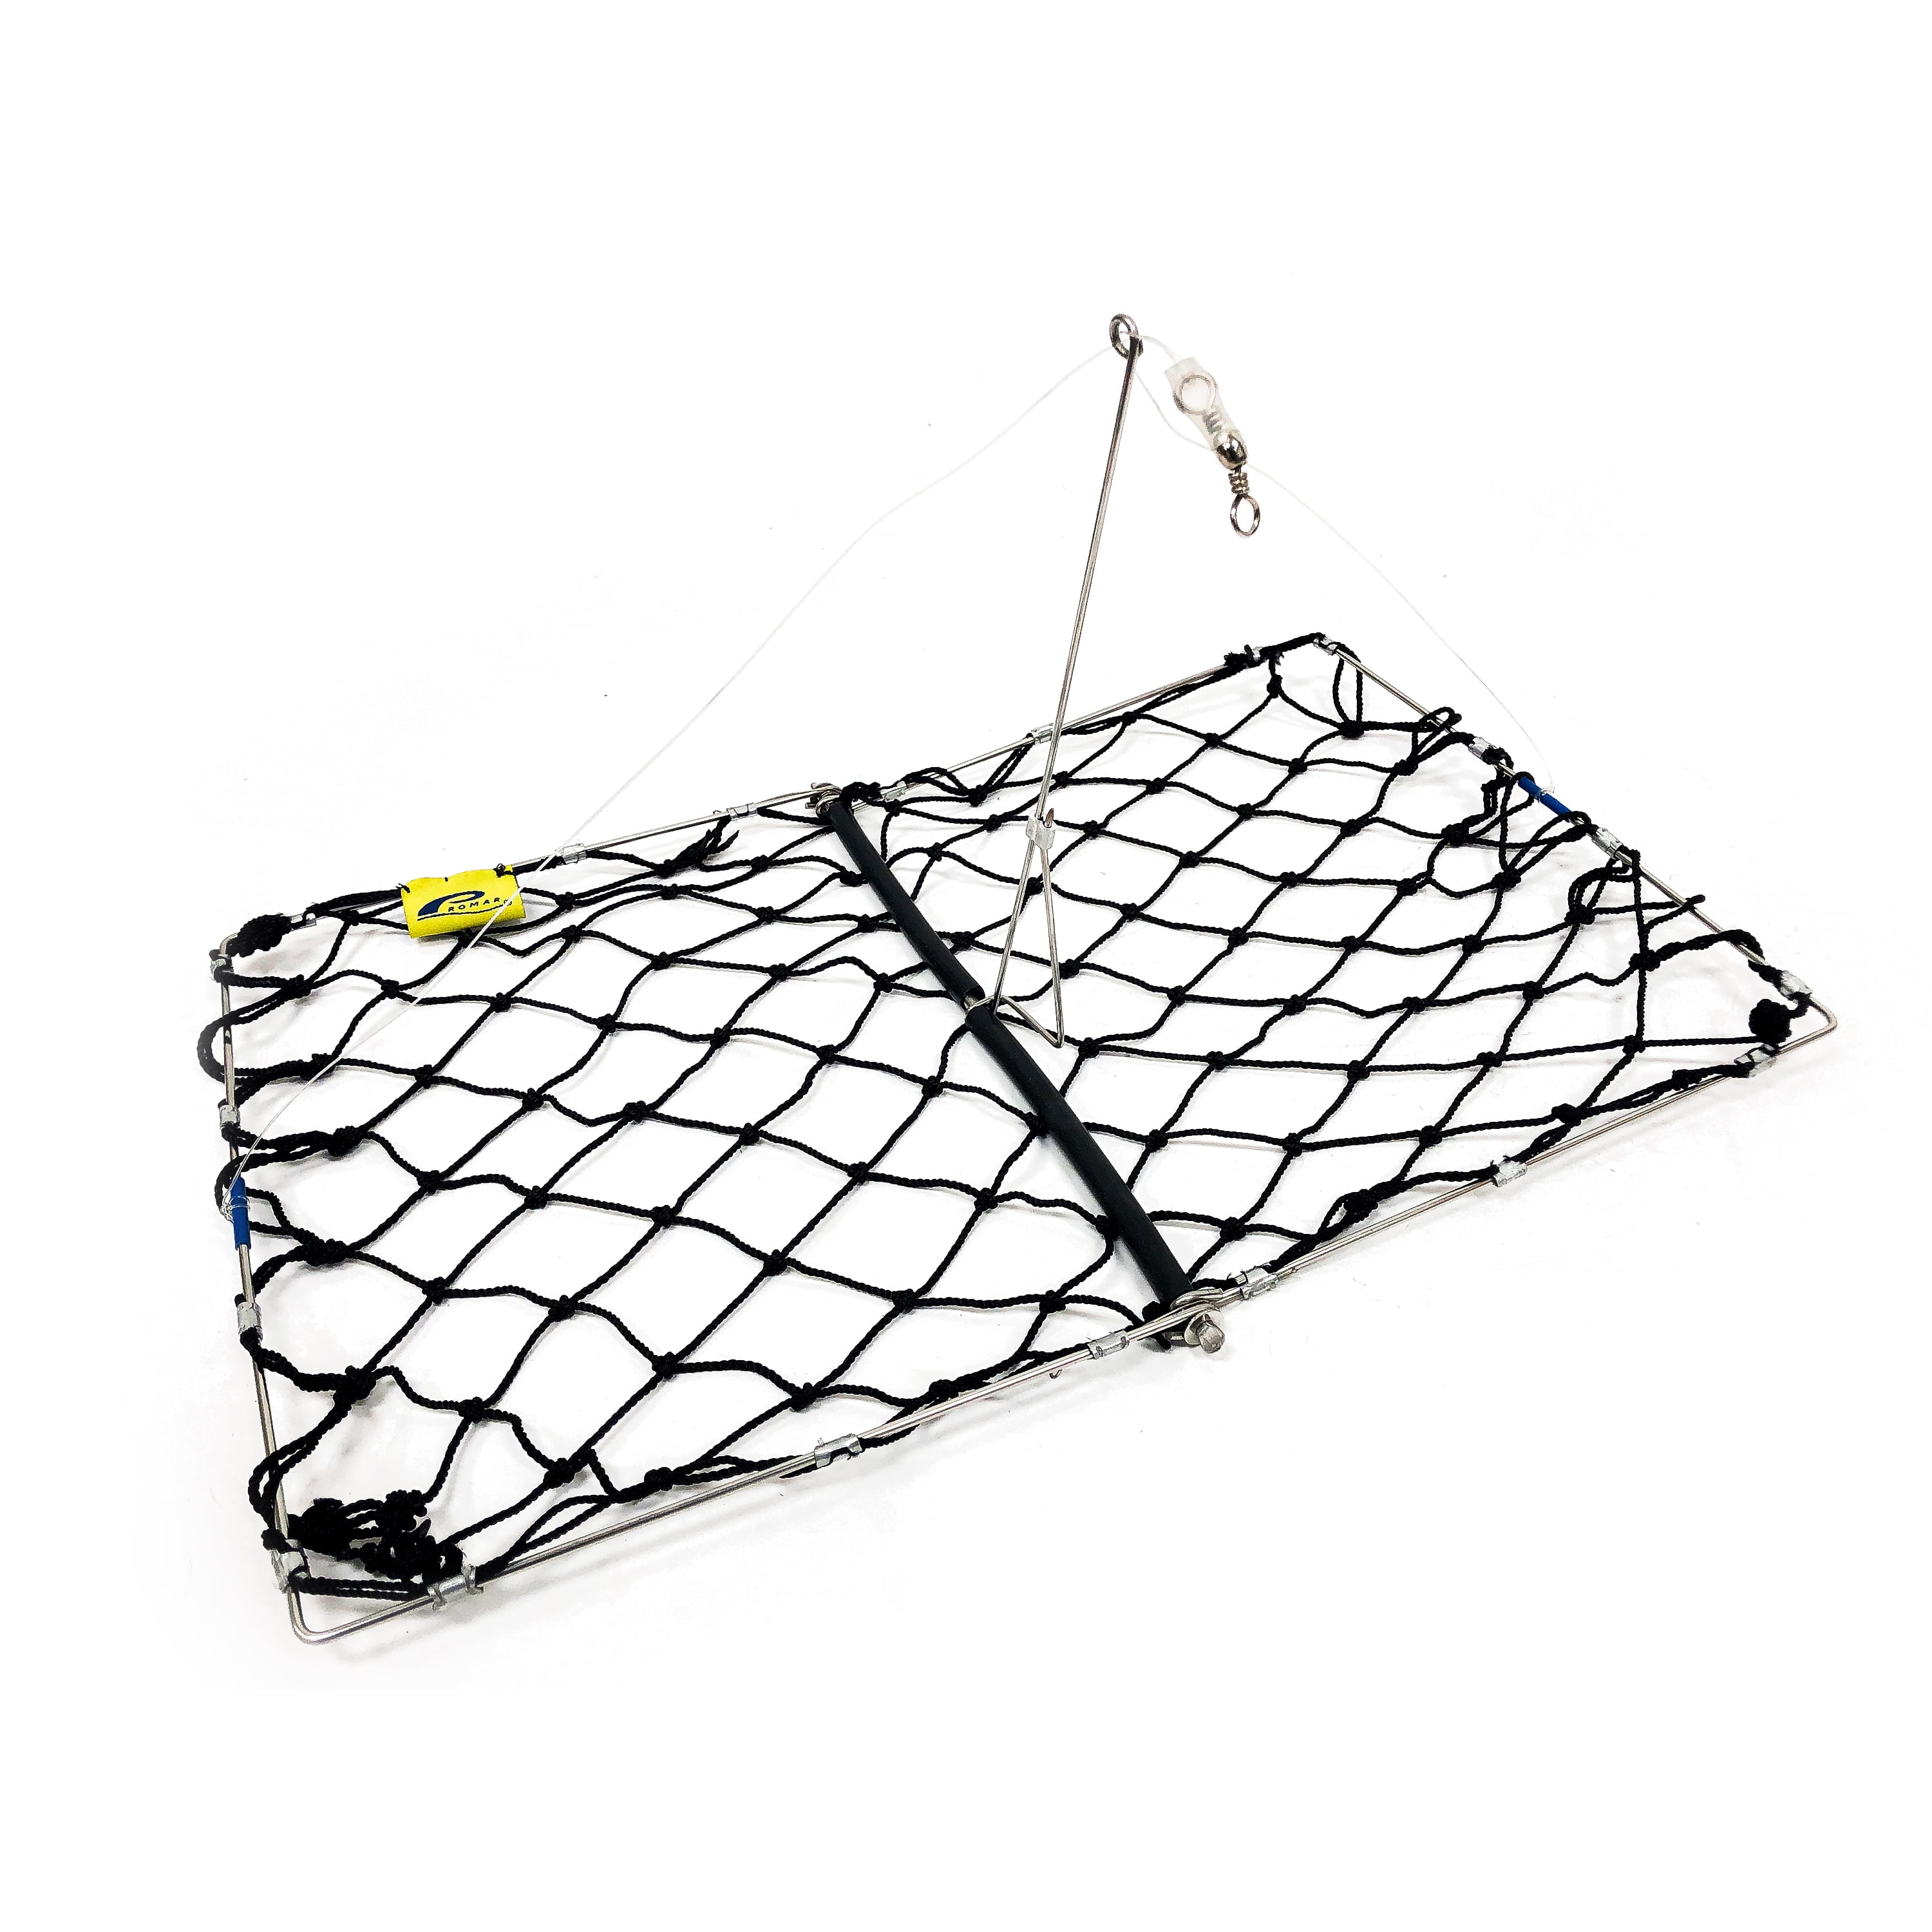 E-Z Catch New Fold-A-Way Premium Quality Two Door Black Crab Trap American Made 